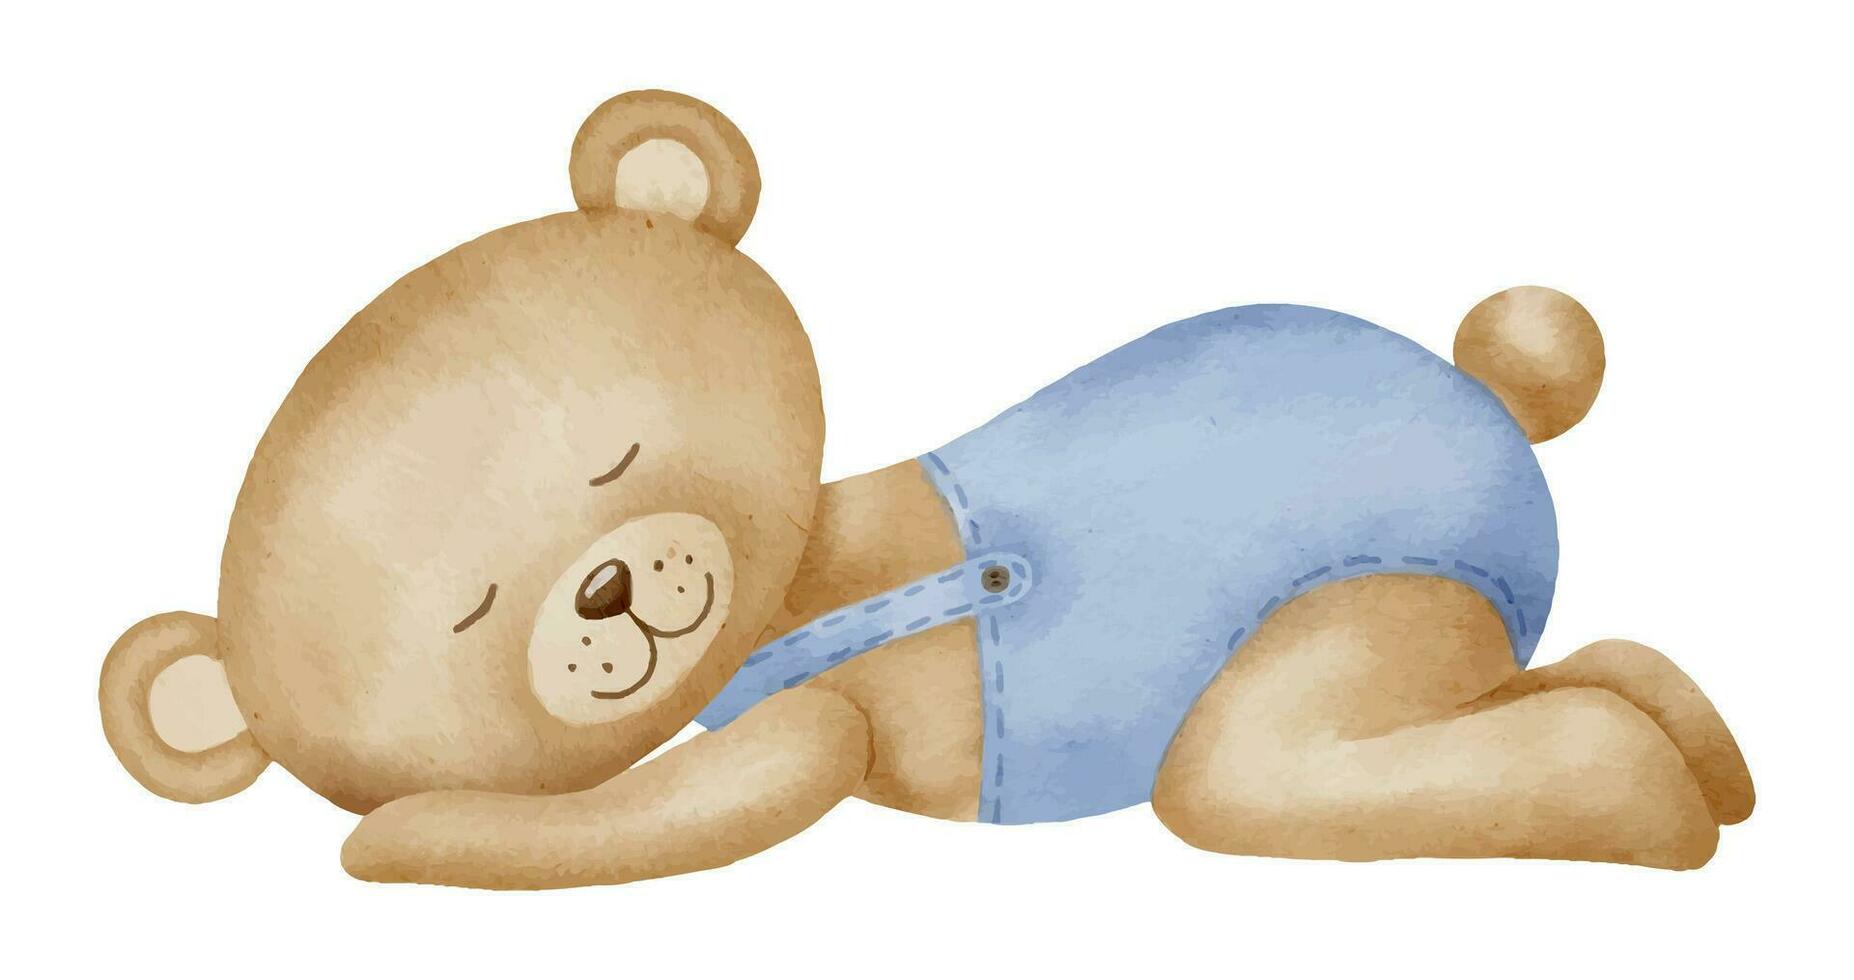 Cute little sleeping Teddy Bear. Hand drawn watercolor illustration of animal toy for Baby shower greeting cards or invitations. Childish drawing for nursery design or kids postcards in pastel colors vector